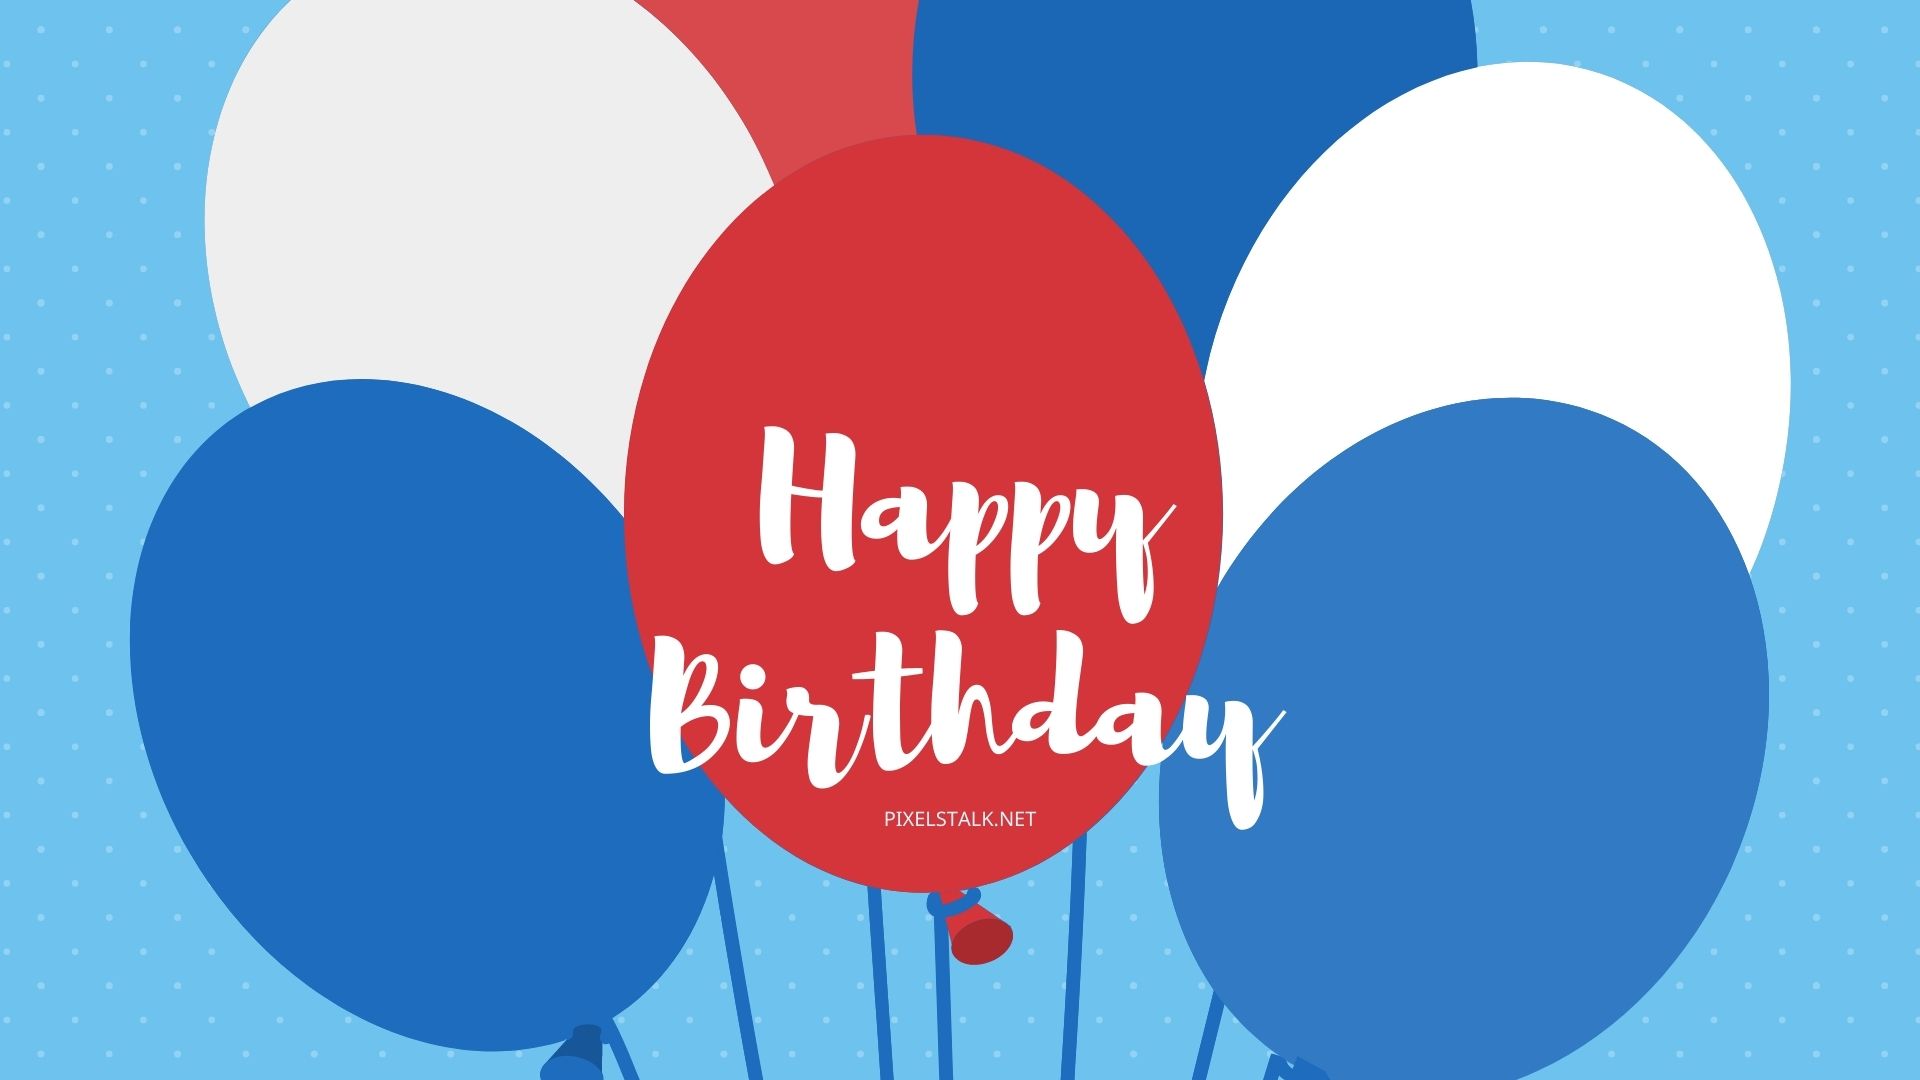 Happy Birthday wallpaper ① Download free full HD wallpapers for desktop  mobile laptop  Happy birthday wallpaper Happy birthday pictures Happy  birthday photos